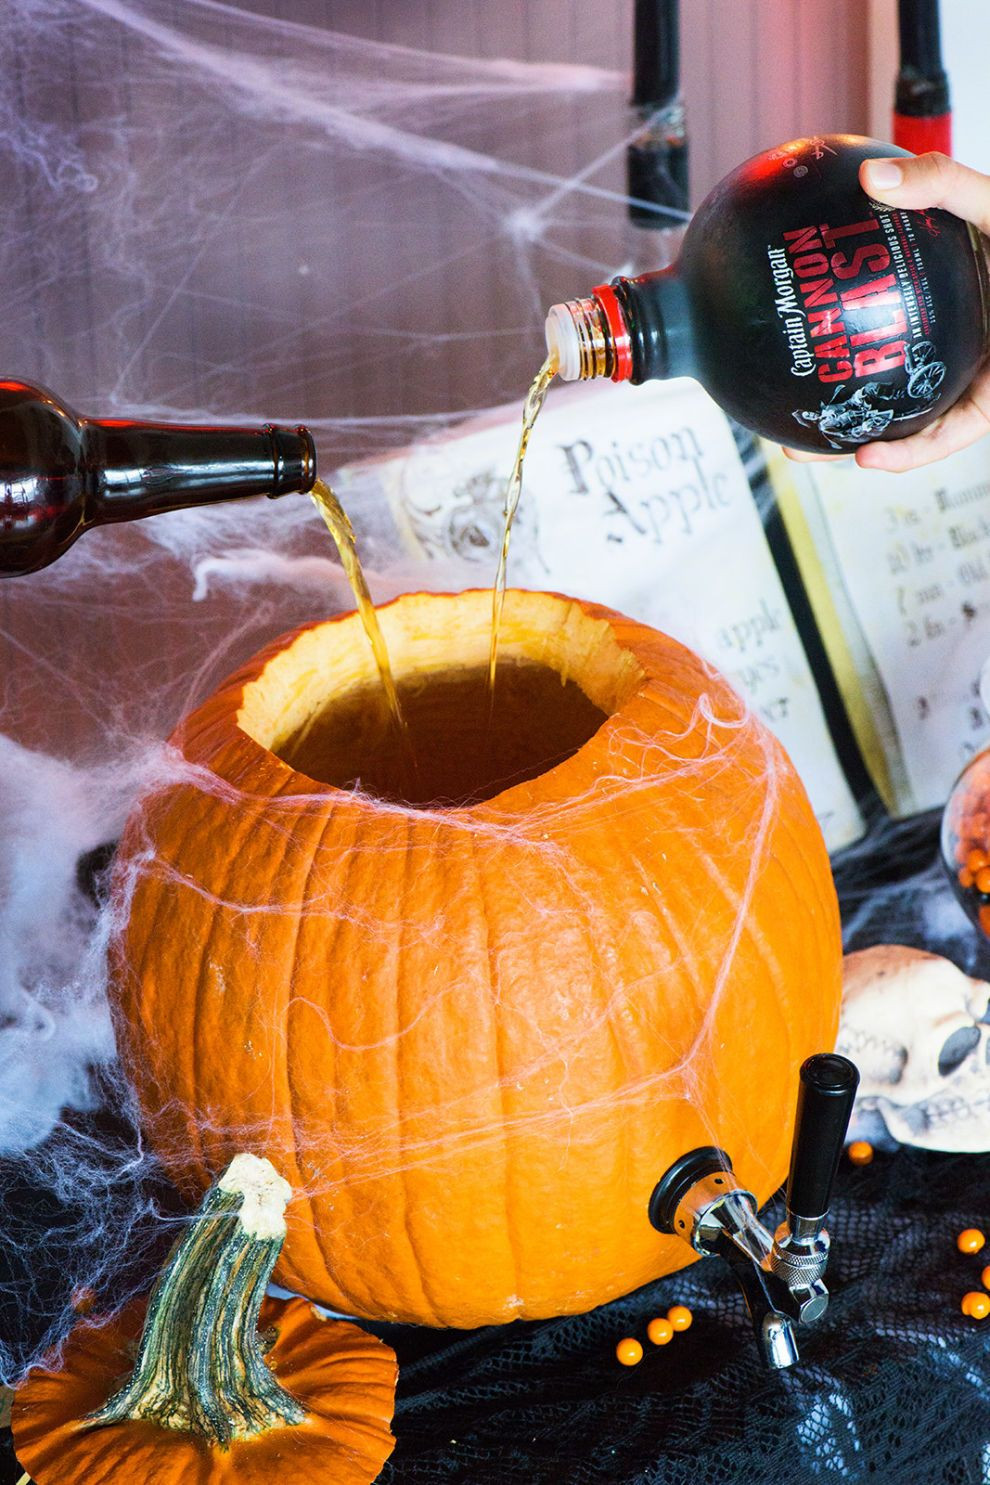 Hosting A Halloween Party Ideas
 11 Ideas For Hosting The Most Epic Halloween Party Ever